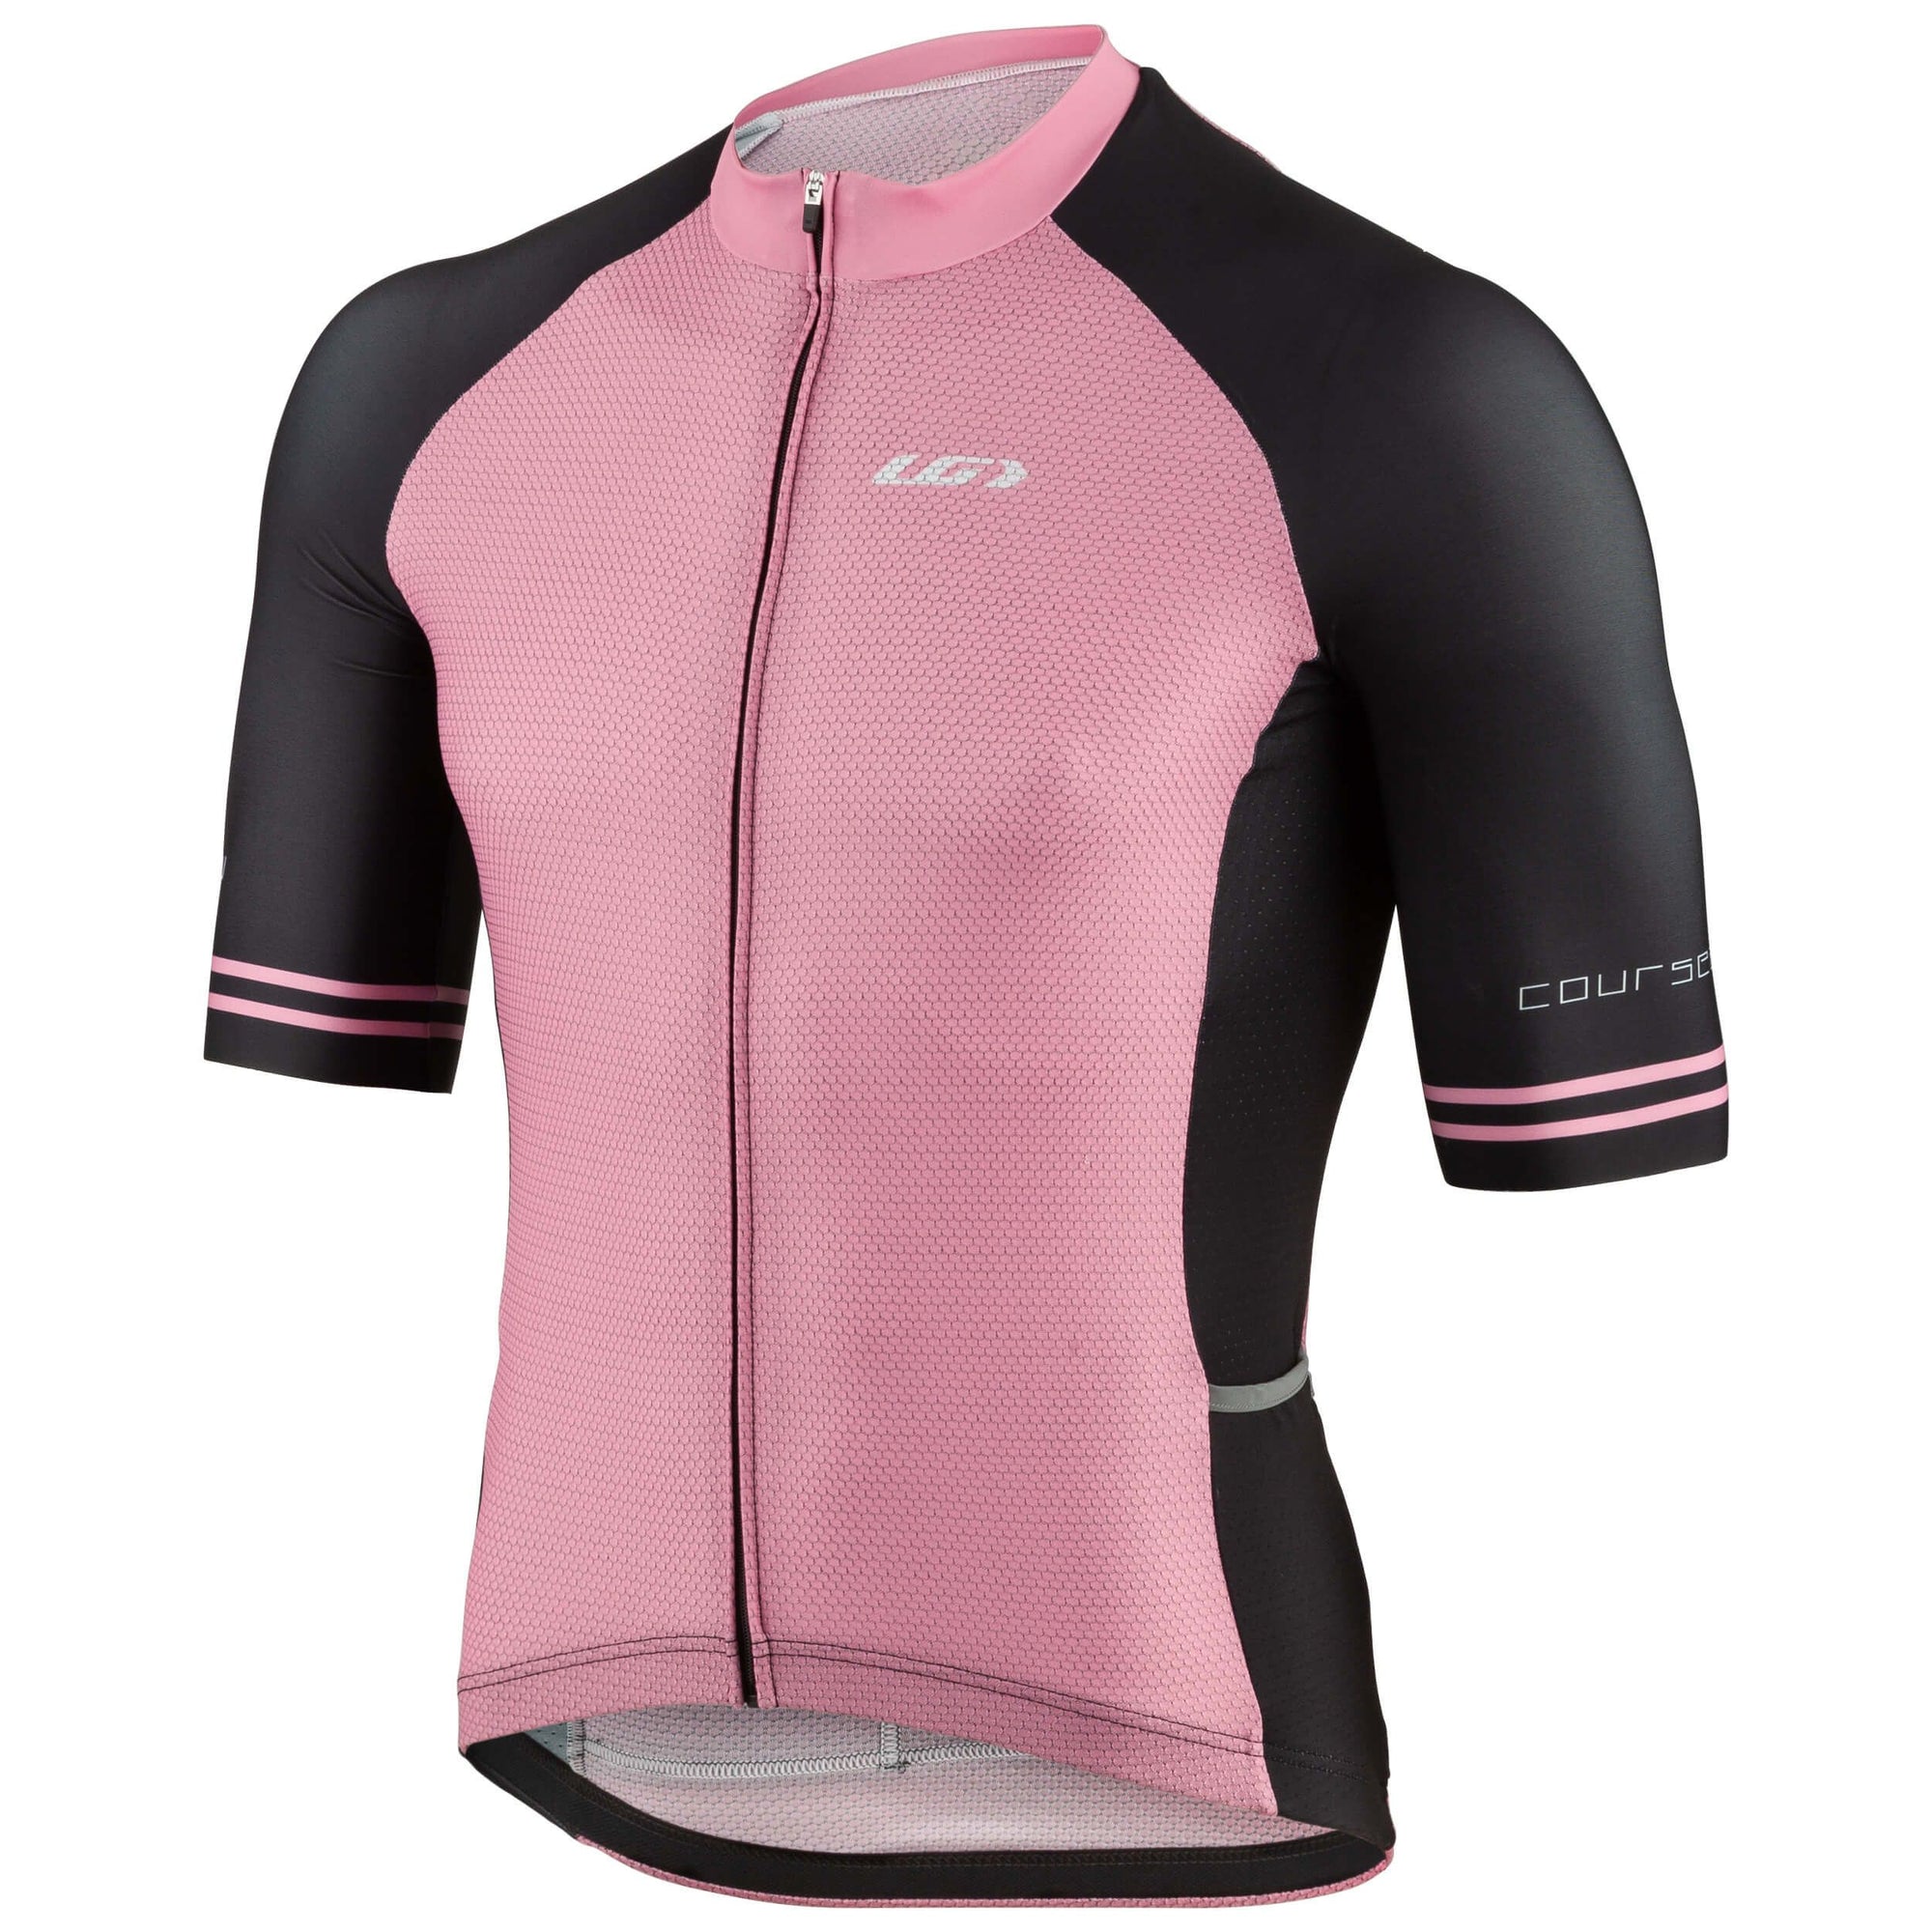 Course Air Jersey - Pale Pink, XL